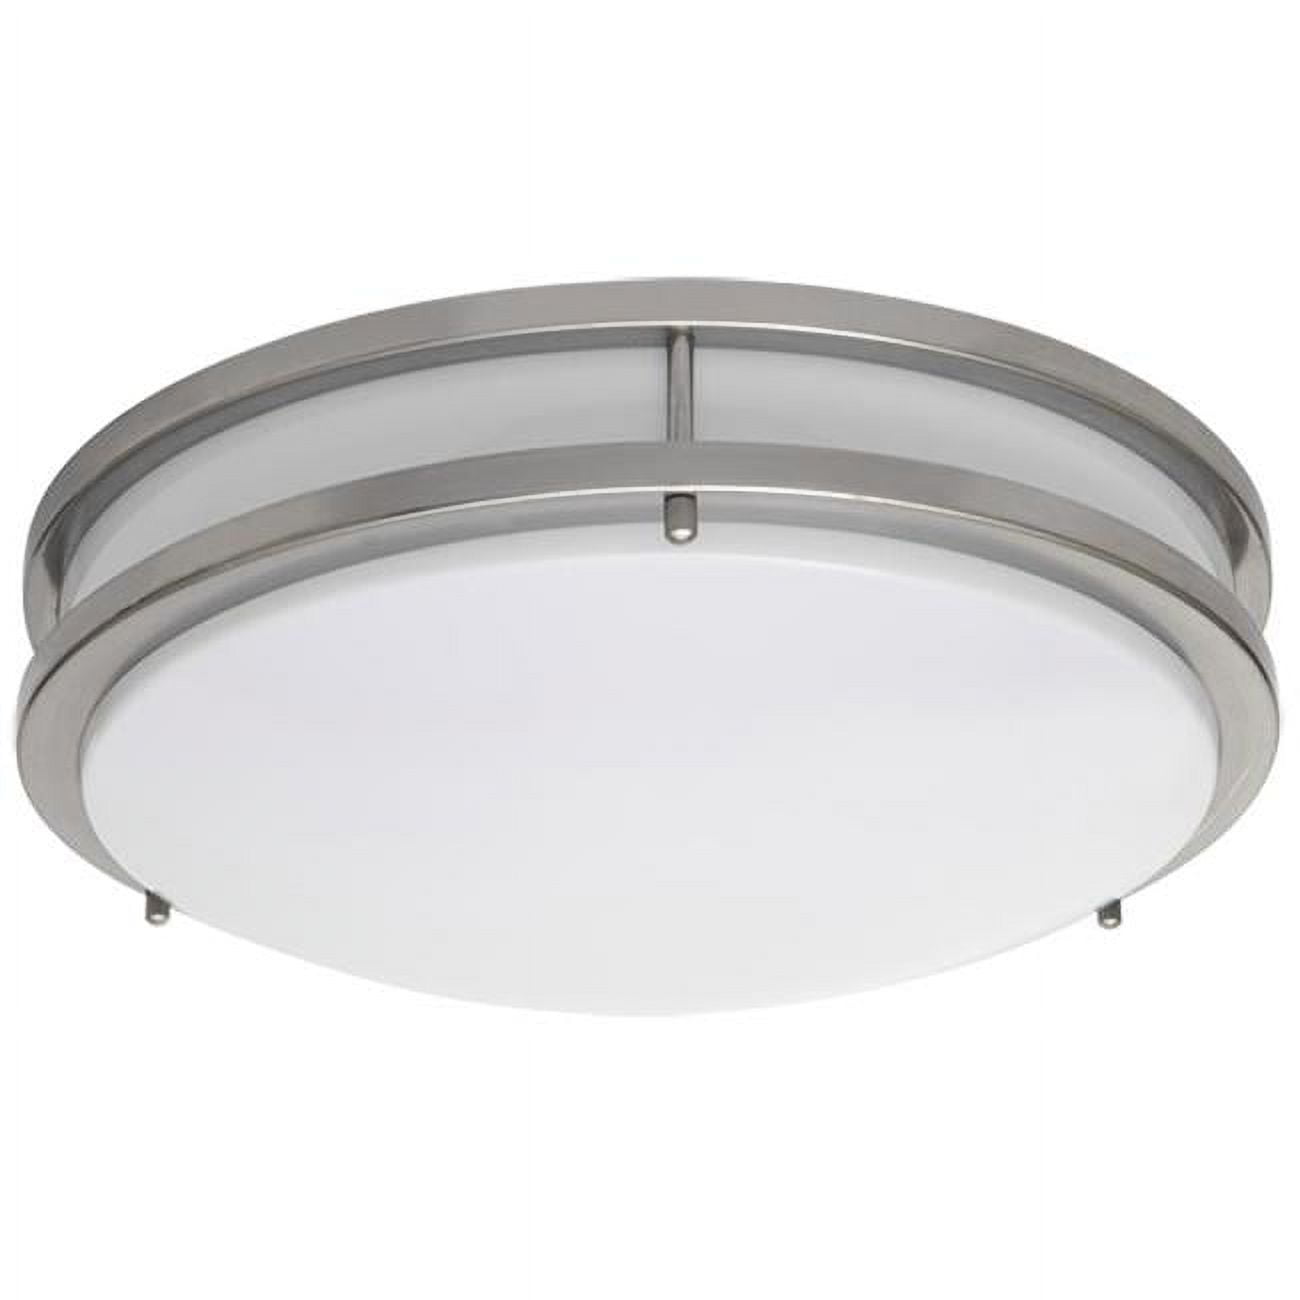 Picture of AMAX Lighting LED-JR001LNKL 10 x 3.8 in. LED Ceiling Fixture - JR Brushed Nickel